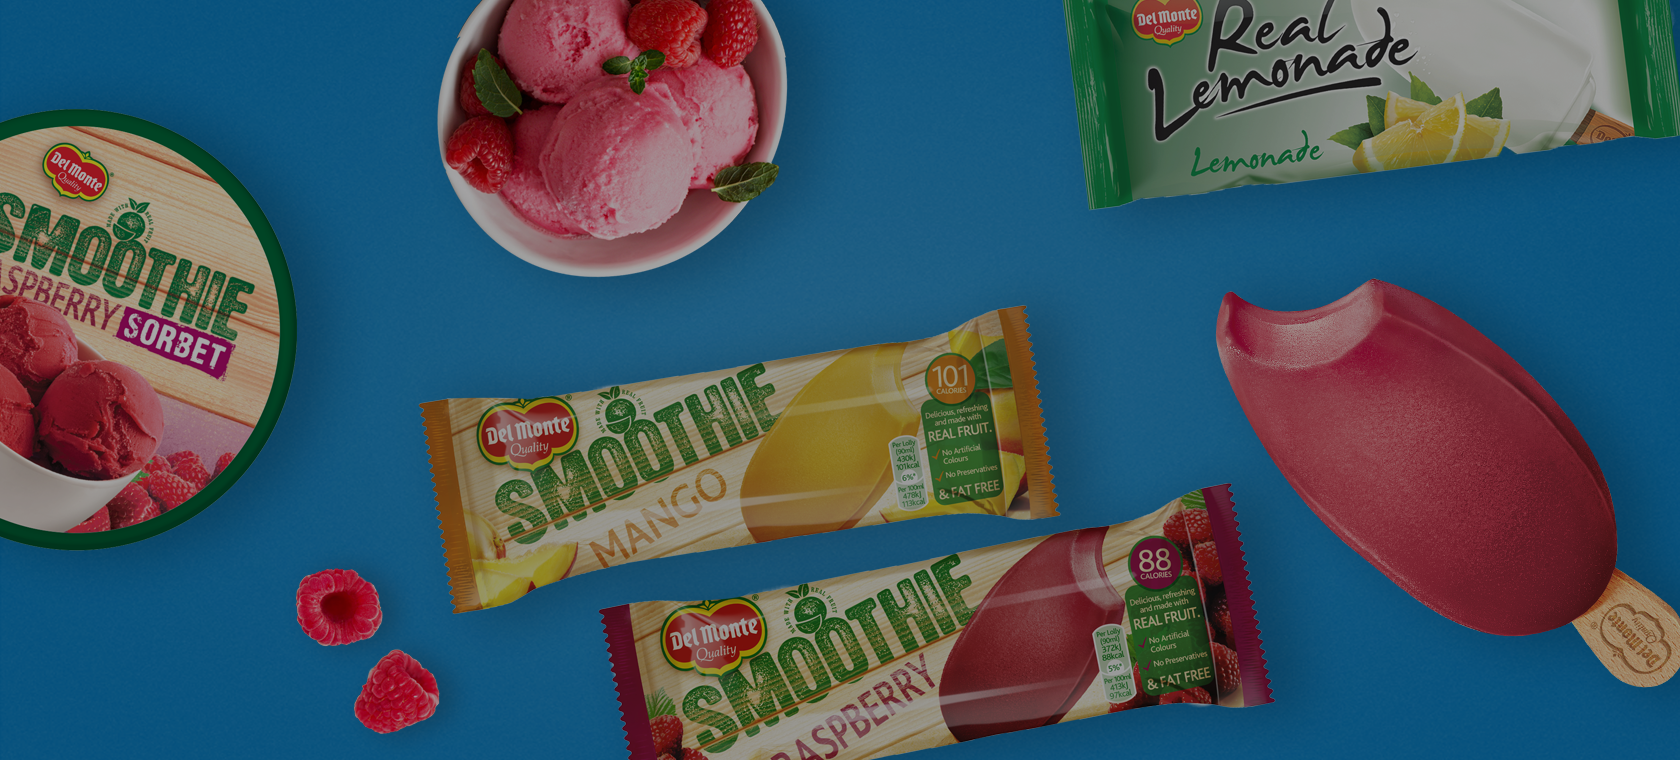 Del Monte Europe - Iced Smoothie | Mango Iced Smoothie Lolly